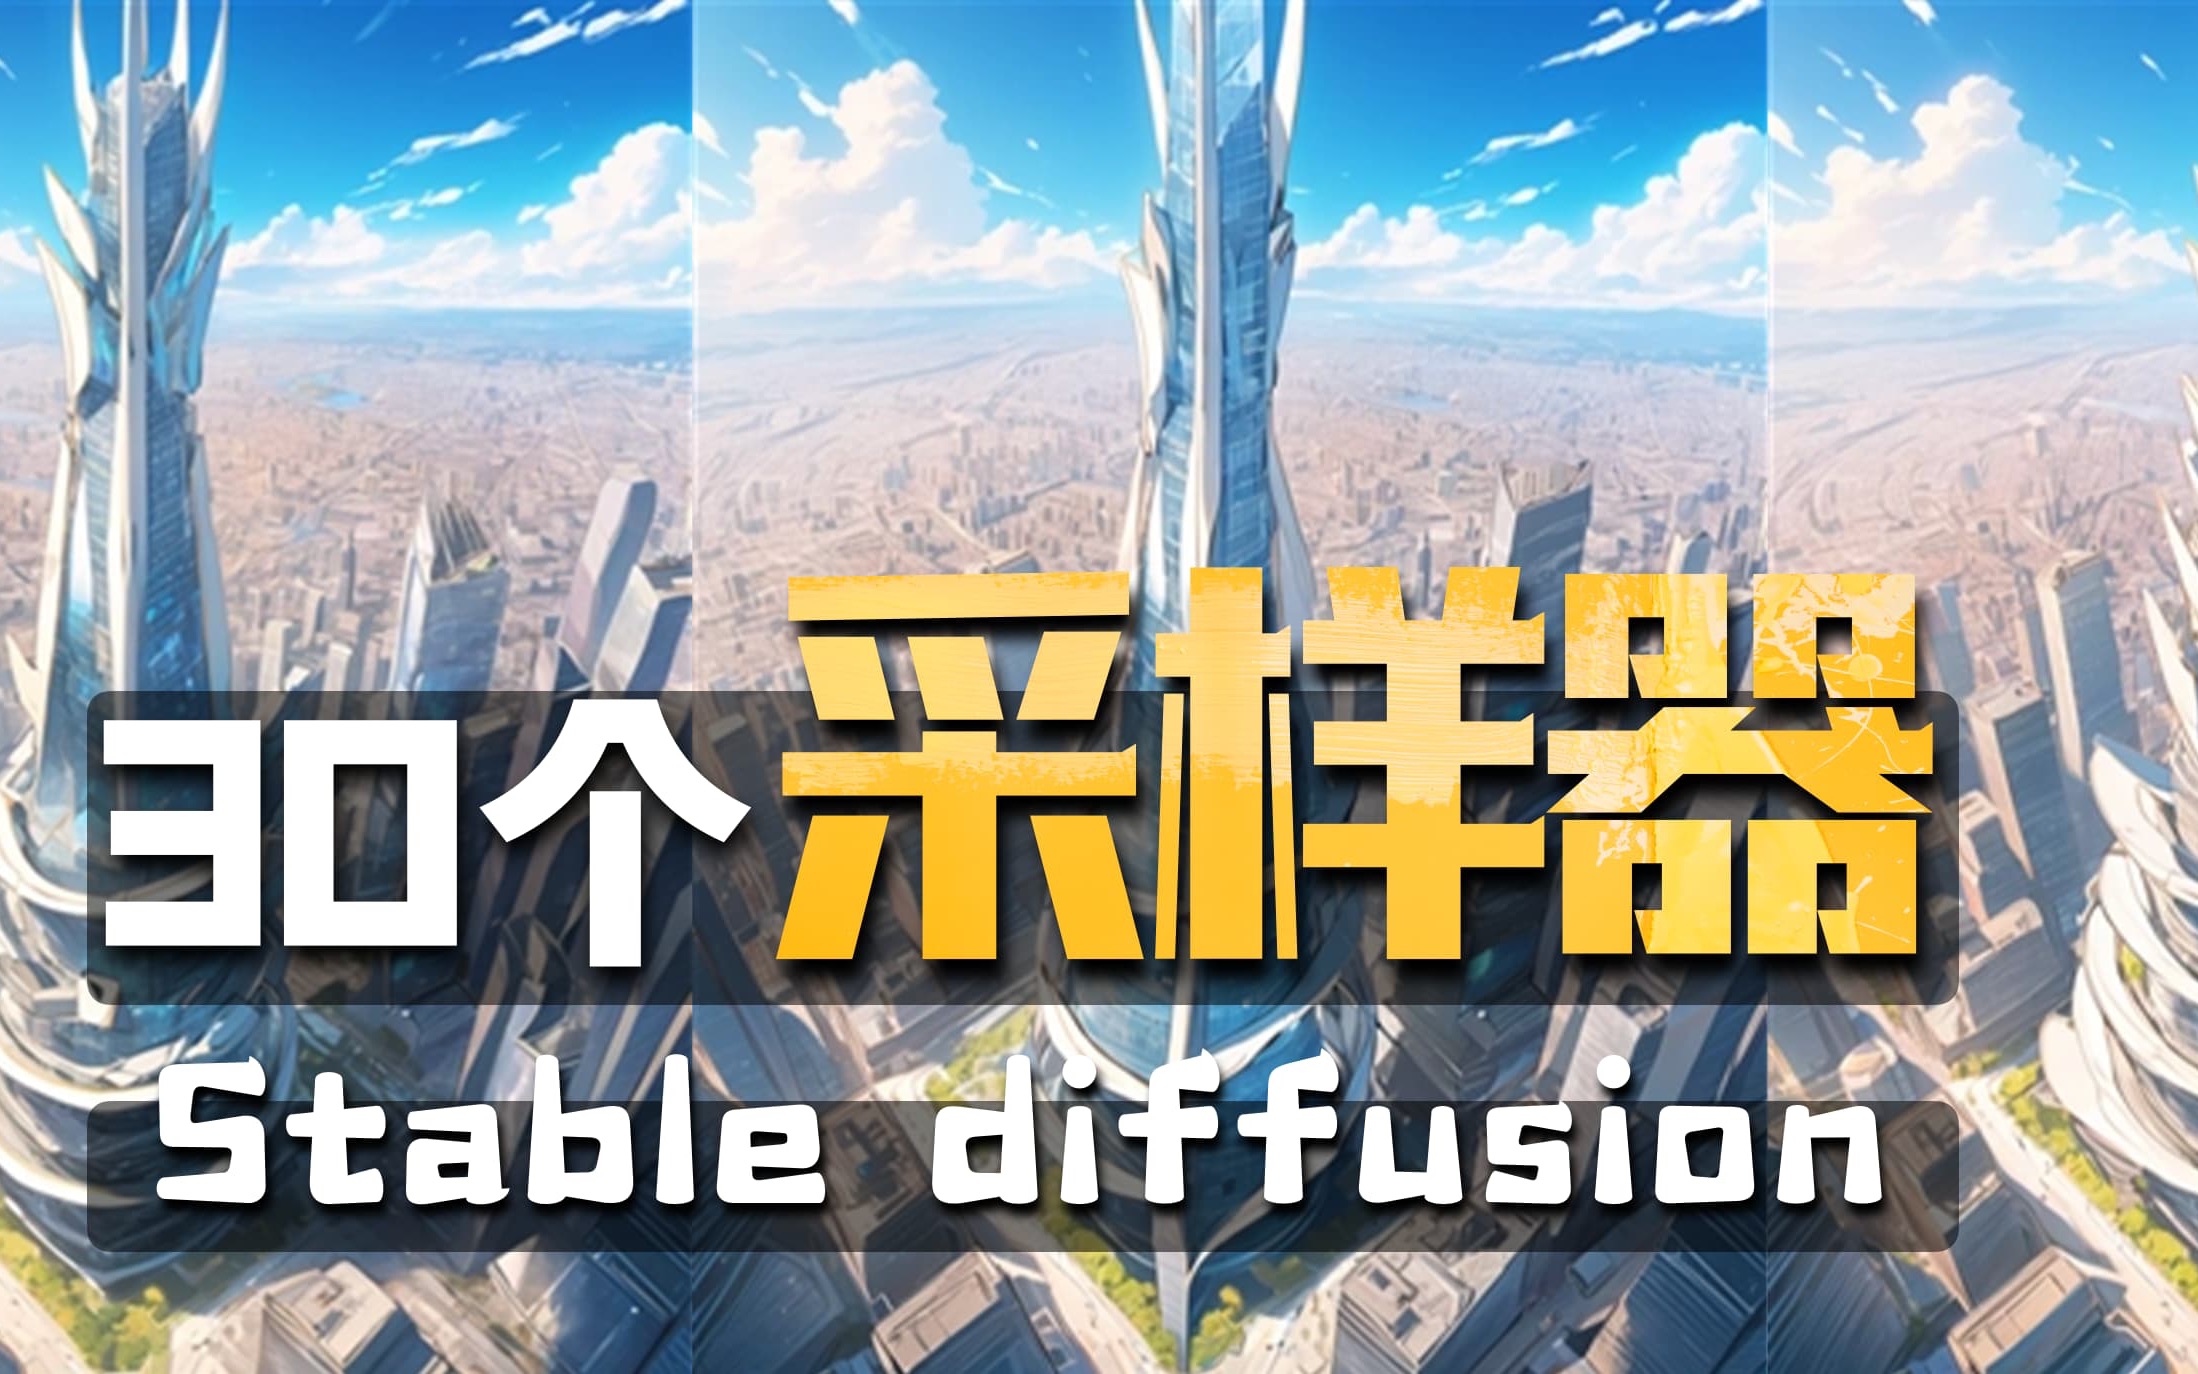 Stable diffusion采样器全解析，30种采样算法教程